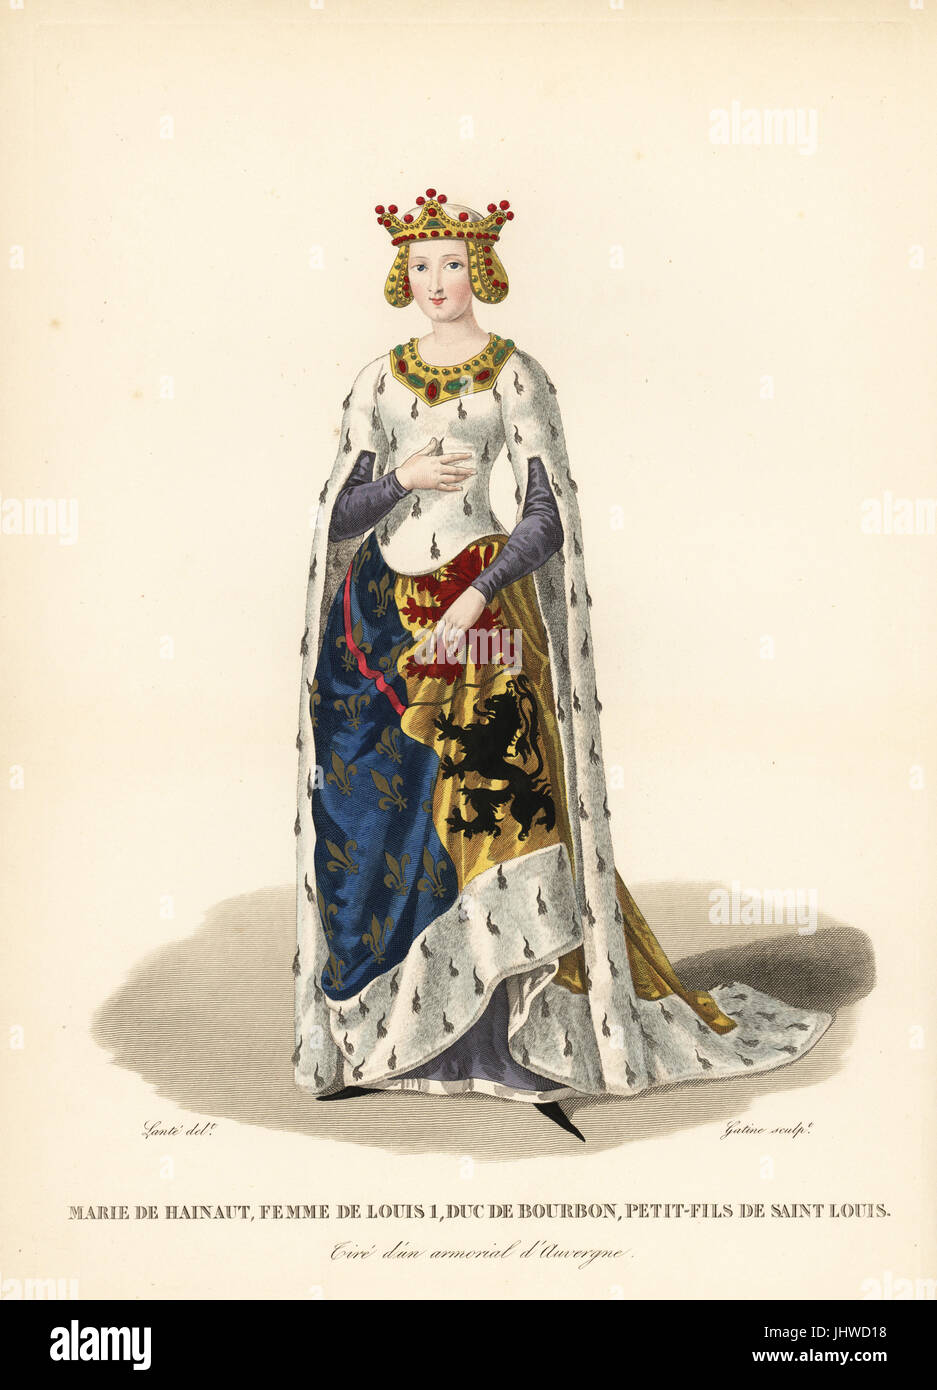 Marie of Hainaut, wife of Louis I, Duke of Bourbon, 1280-1354. She wears a crown with ear pieces, a rich armorial robe with ermine bodice and sleeves, coat of arms skirt (her husband's fleurs de lys blazon with the red lion of Holland and the black lion of Flandres), over a petticoat, crakows or poulaines. From an ancient armorial of Auvergne. Handcoloured copperplate engraving by Georges Jacques Gatine after an illustration by Louis Marie Lante from Galerie Francaise de Femmes Celebres, Paris, 1827. Stock Photo